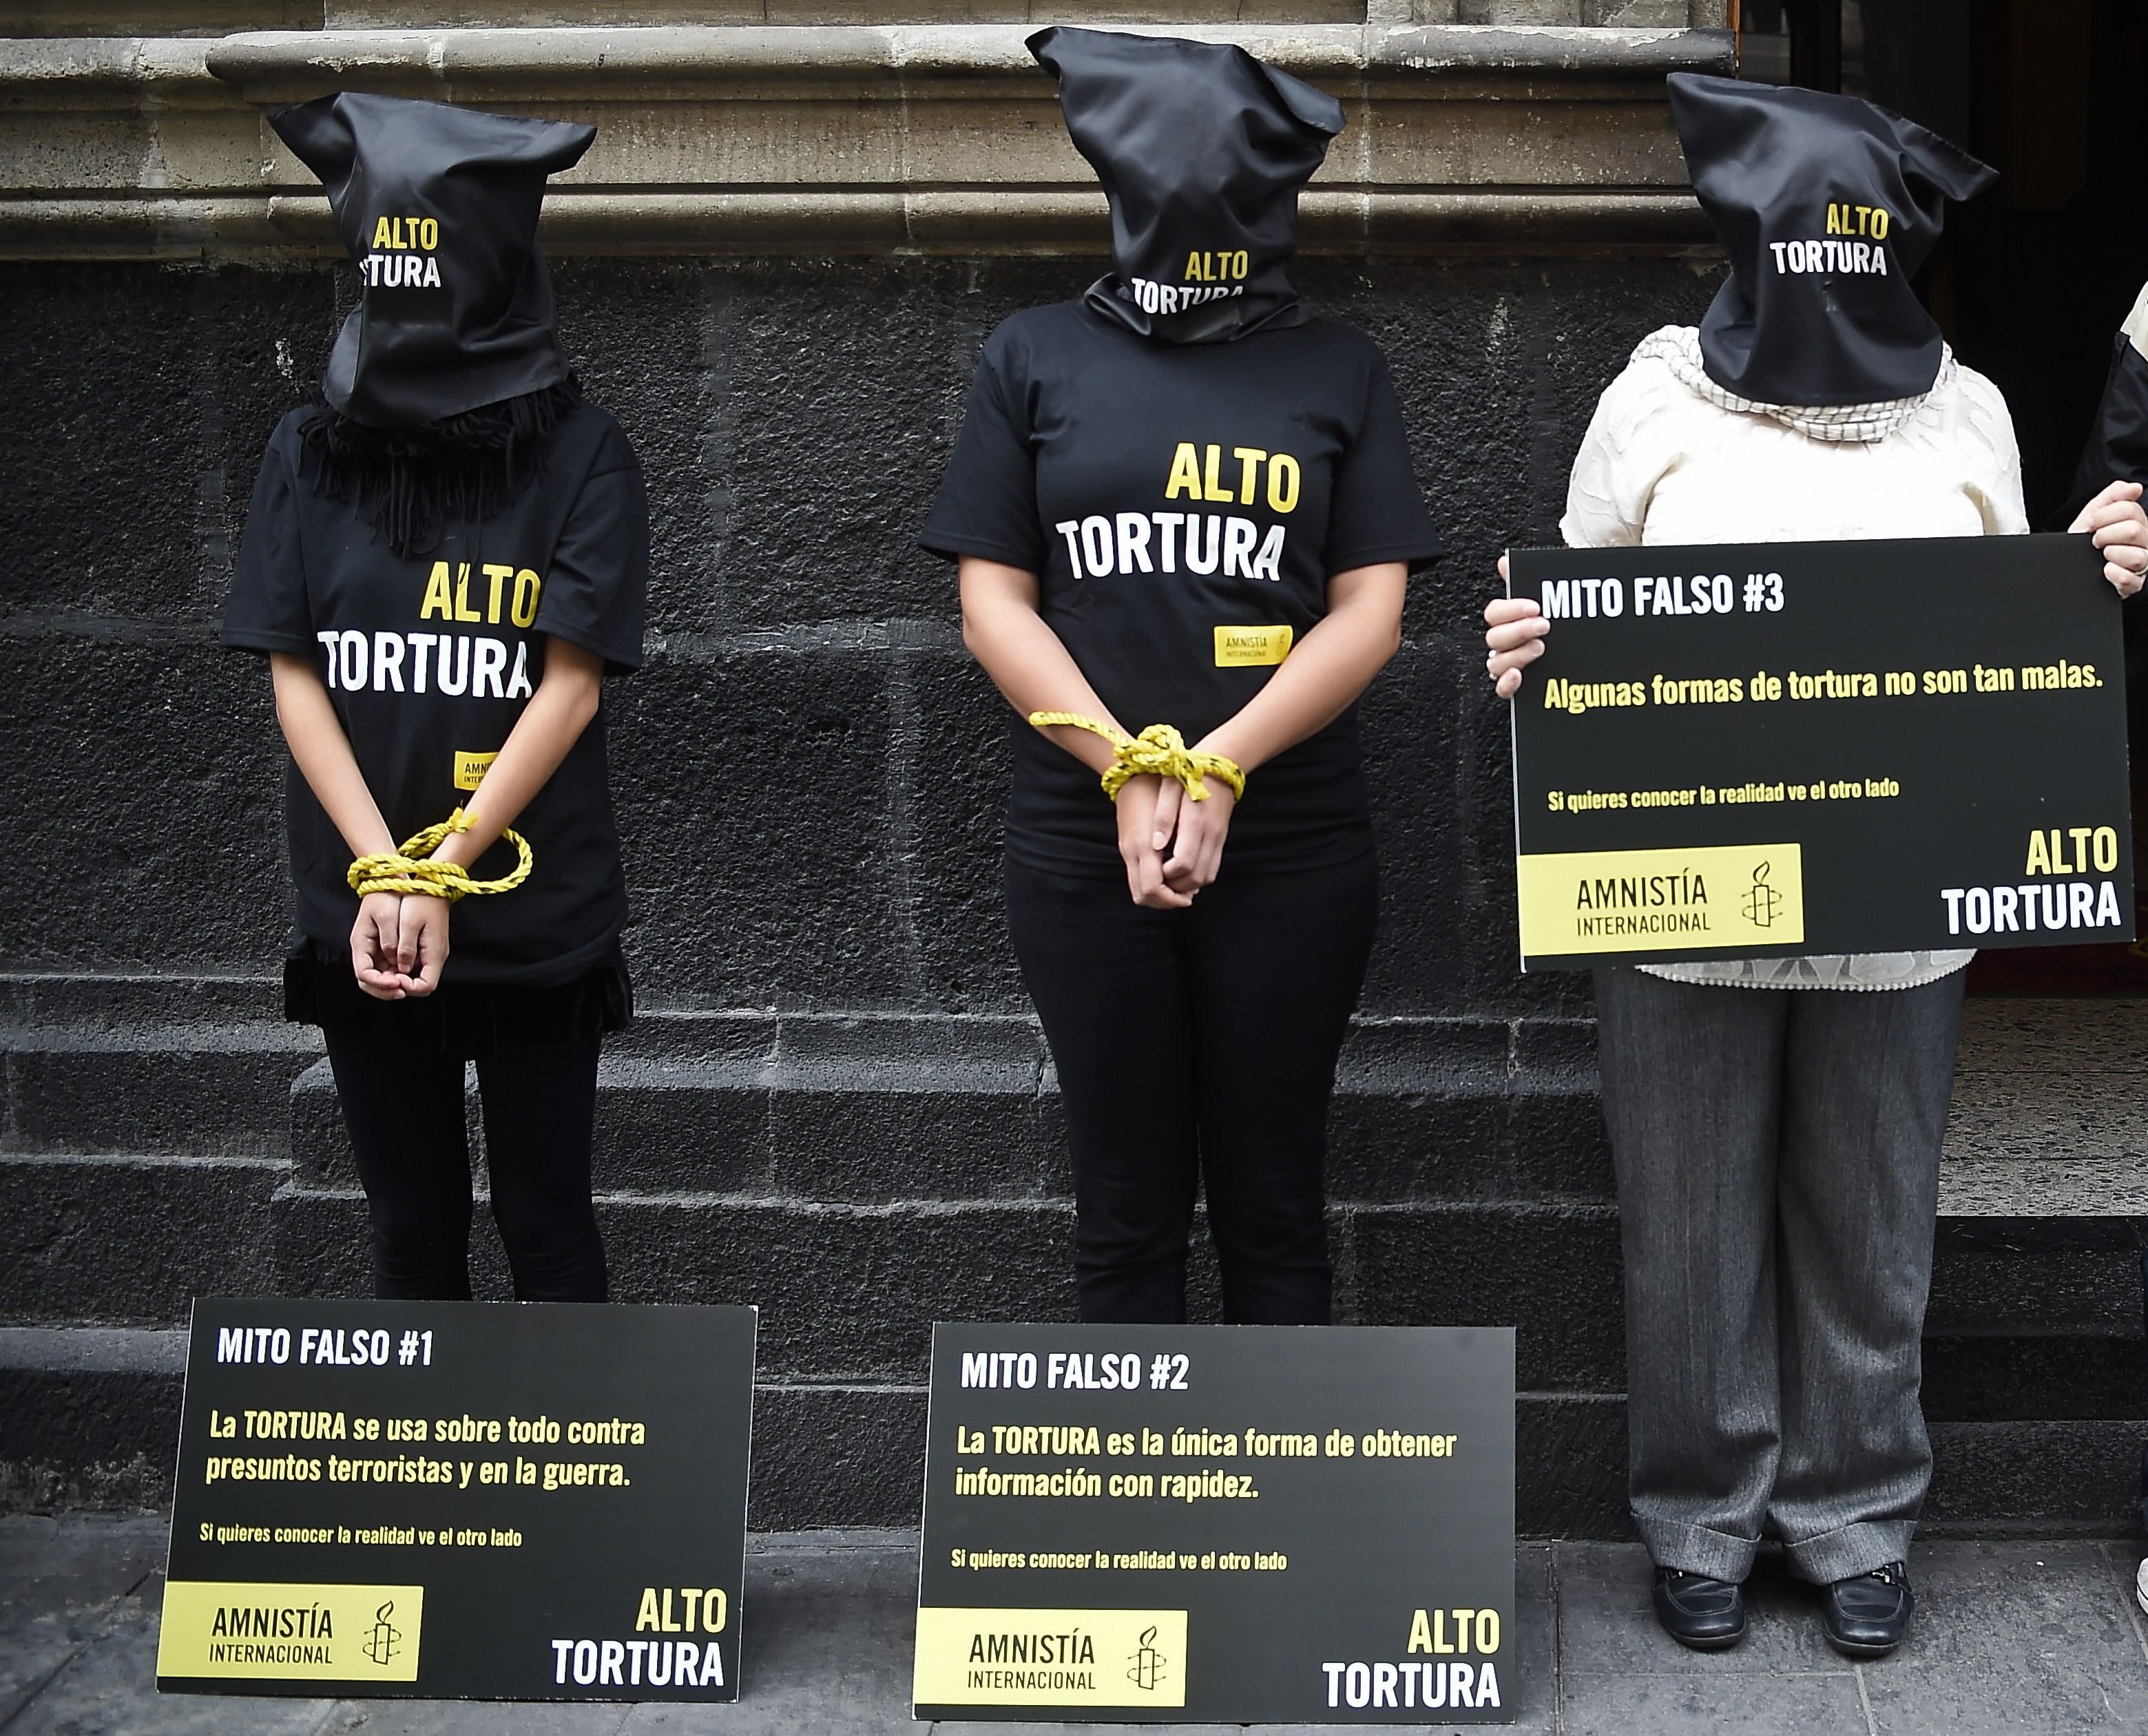 Amnesty International protesterar mot tortyr i samband med att rapporten Out of Control: Torture and other ill-treatment in Mexico i september 2014. (Foto: Ronaldo Schemidt /AFP/Getty Image)